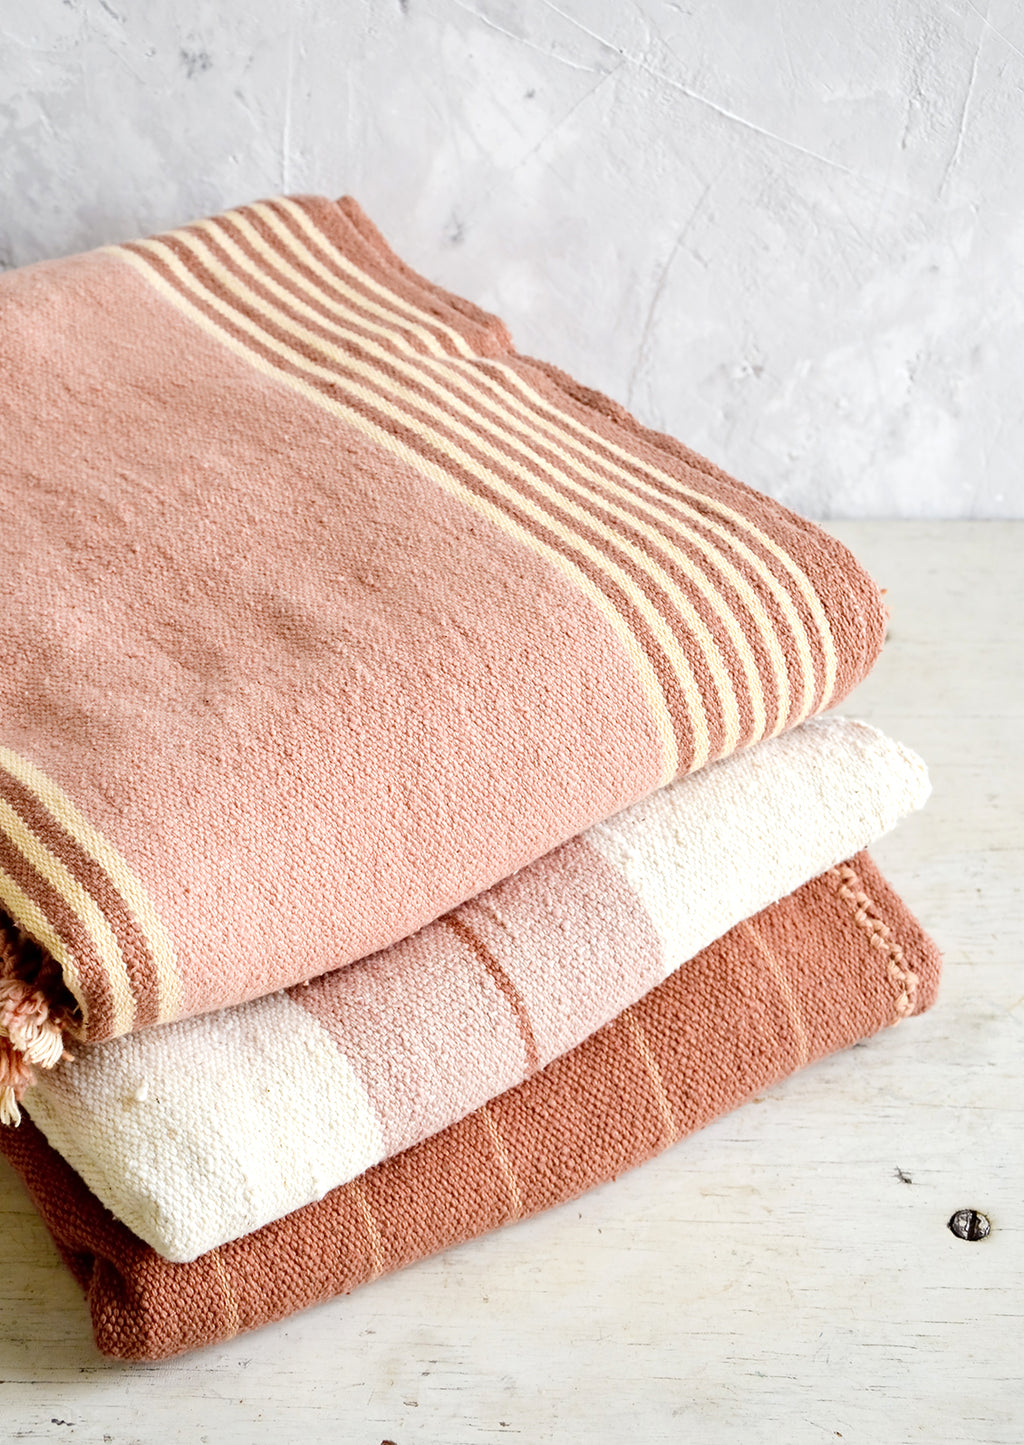 3: Stack of naturally colored cotton throws in pink, cream and terracotta